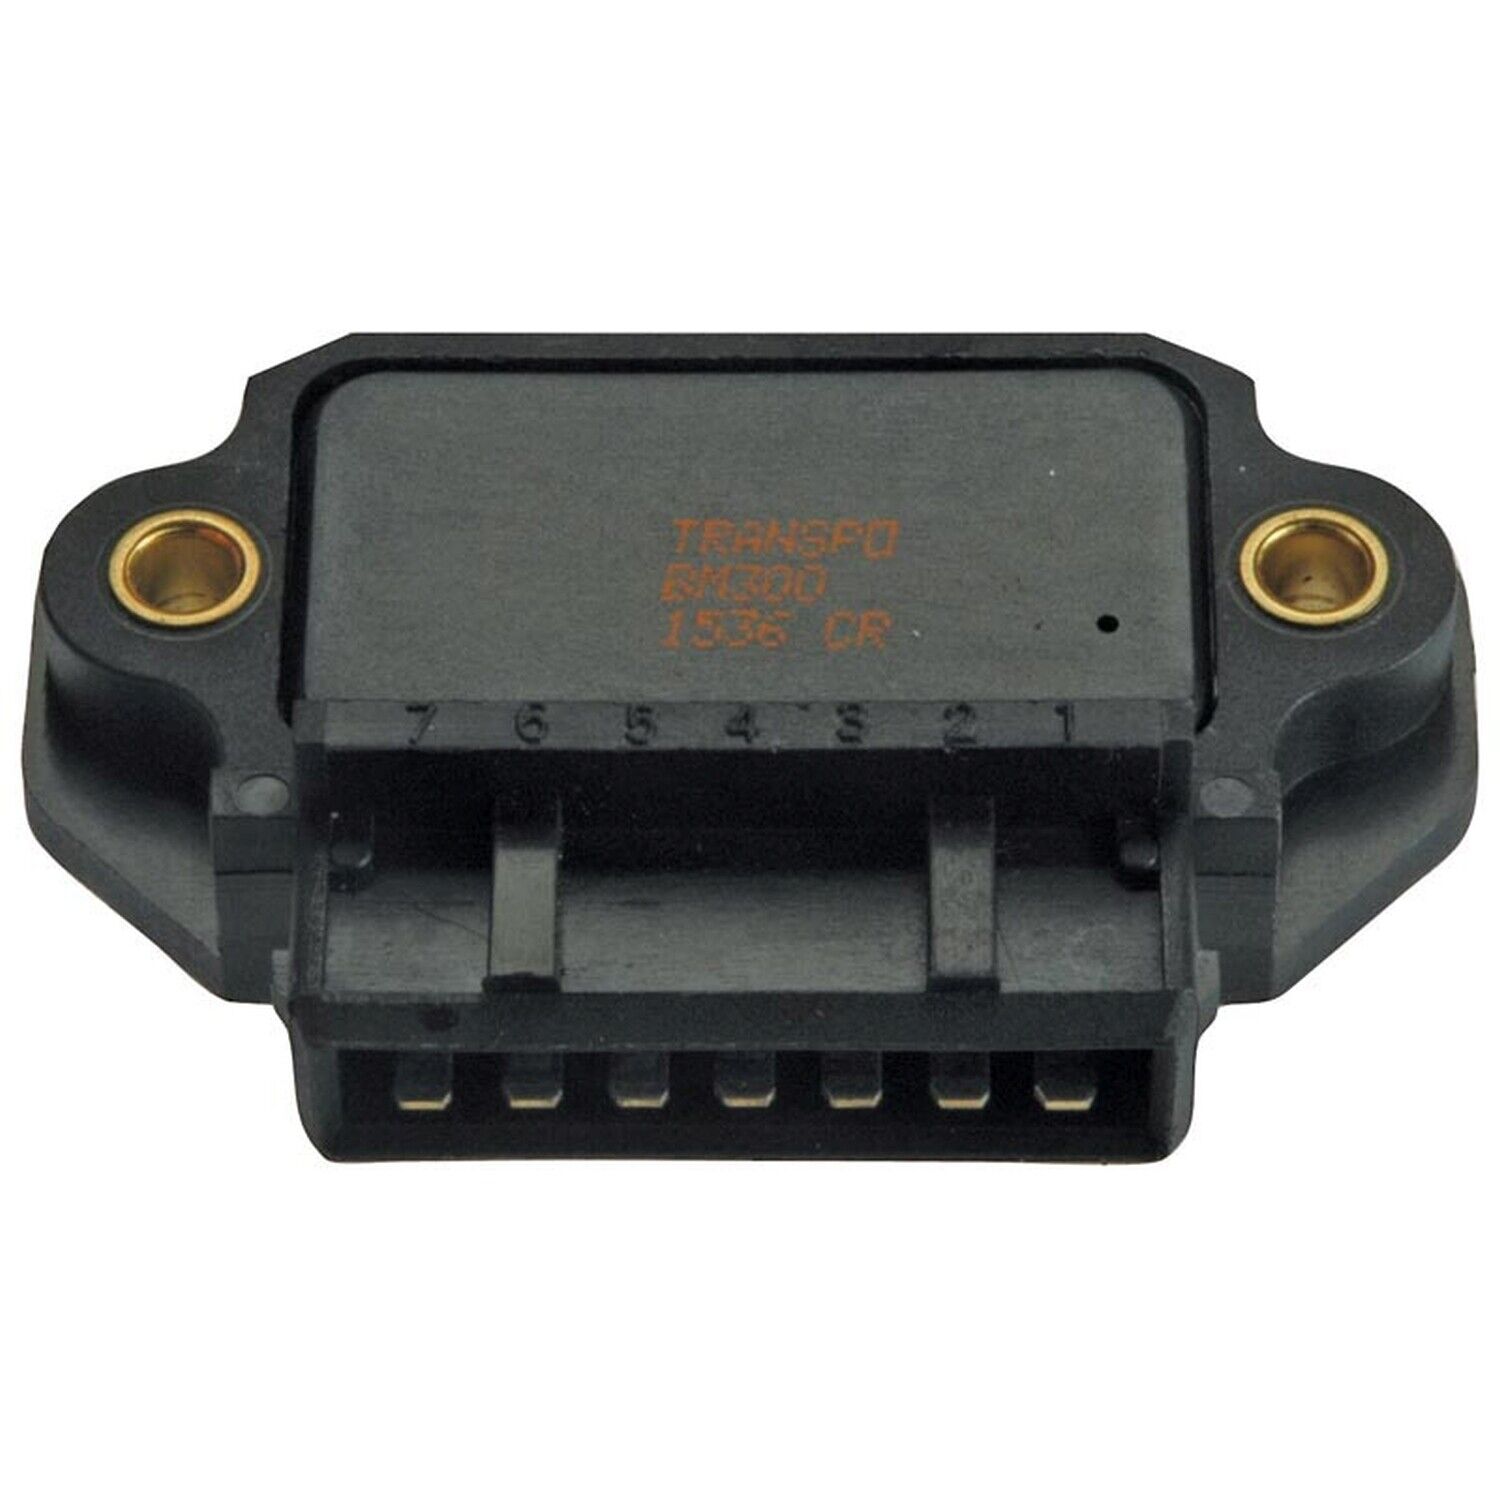 New Module, Ignition For Opel Rekord E 81-84 0227100138 0227100139 0227118307